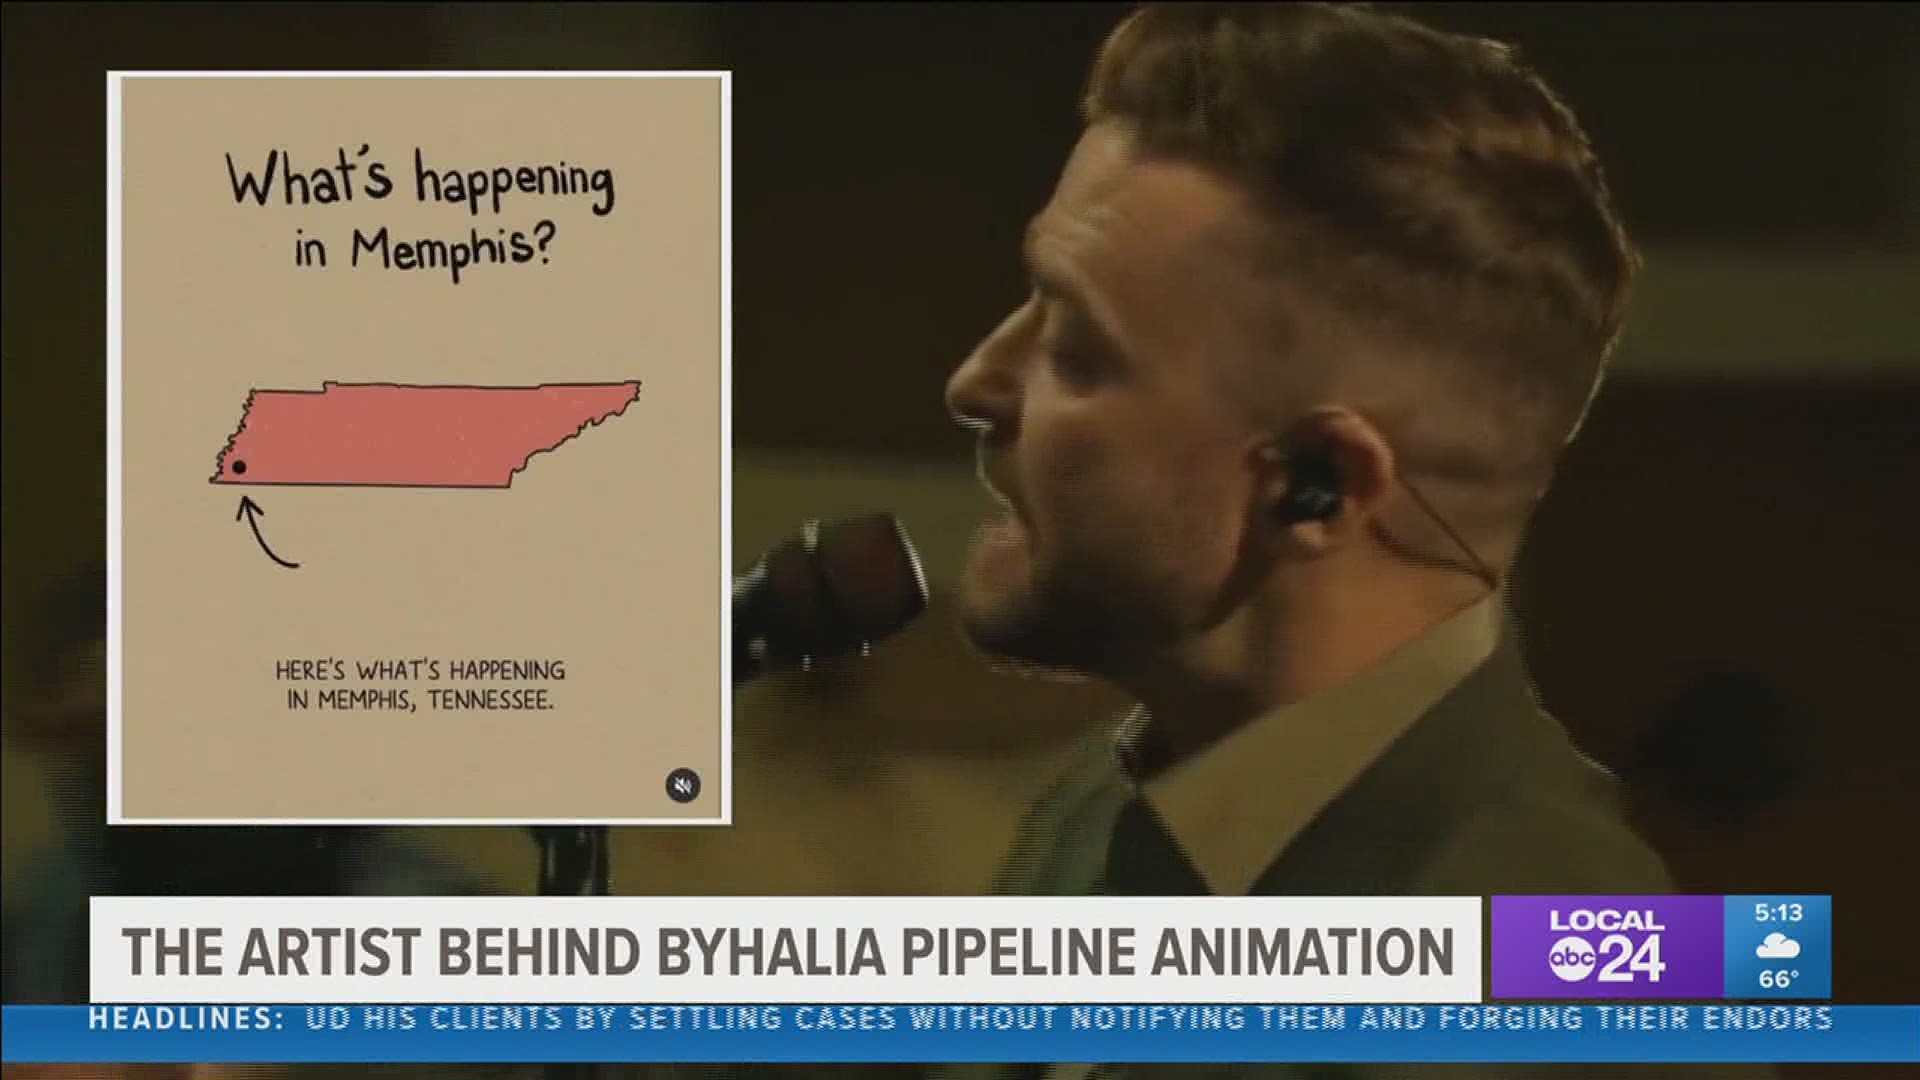 Justin Timberlake urged his 60 million followers to sign a petition against the Byhalia Connection pipeline.